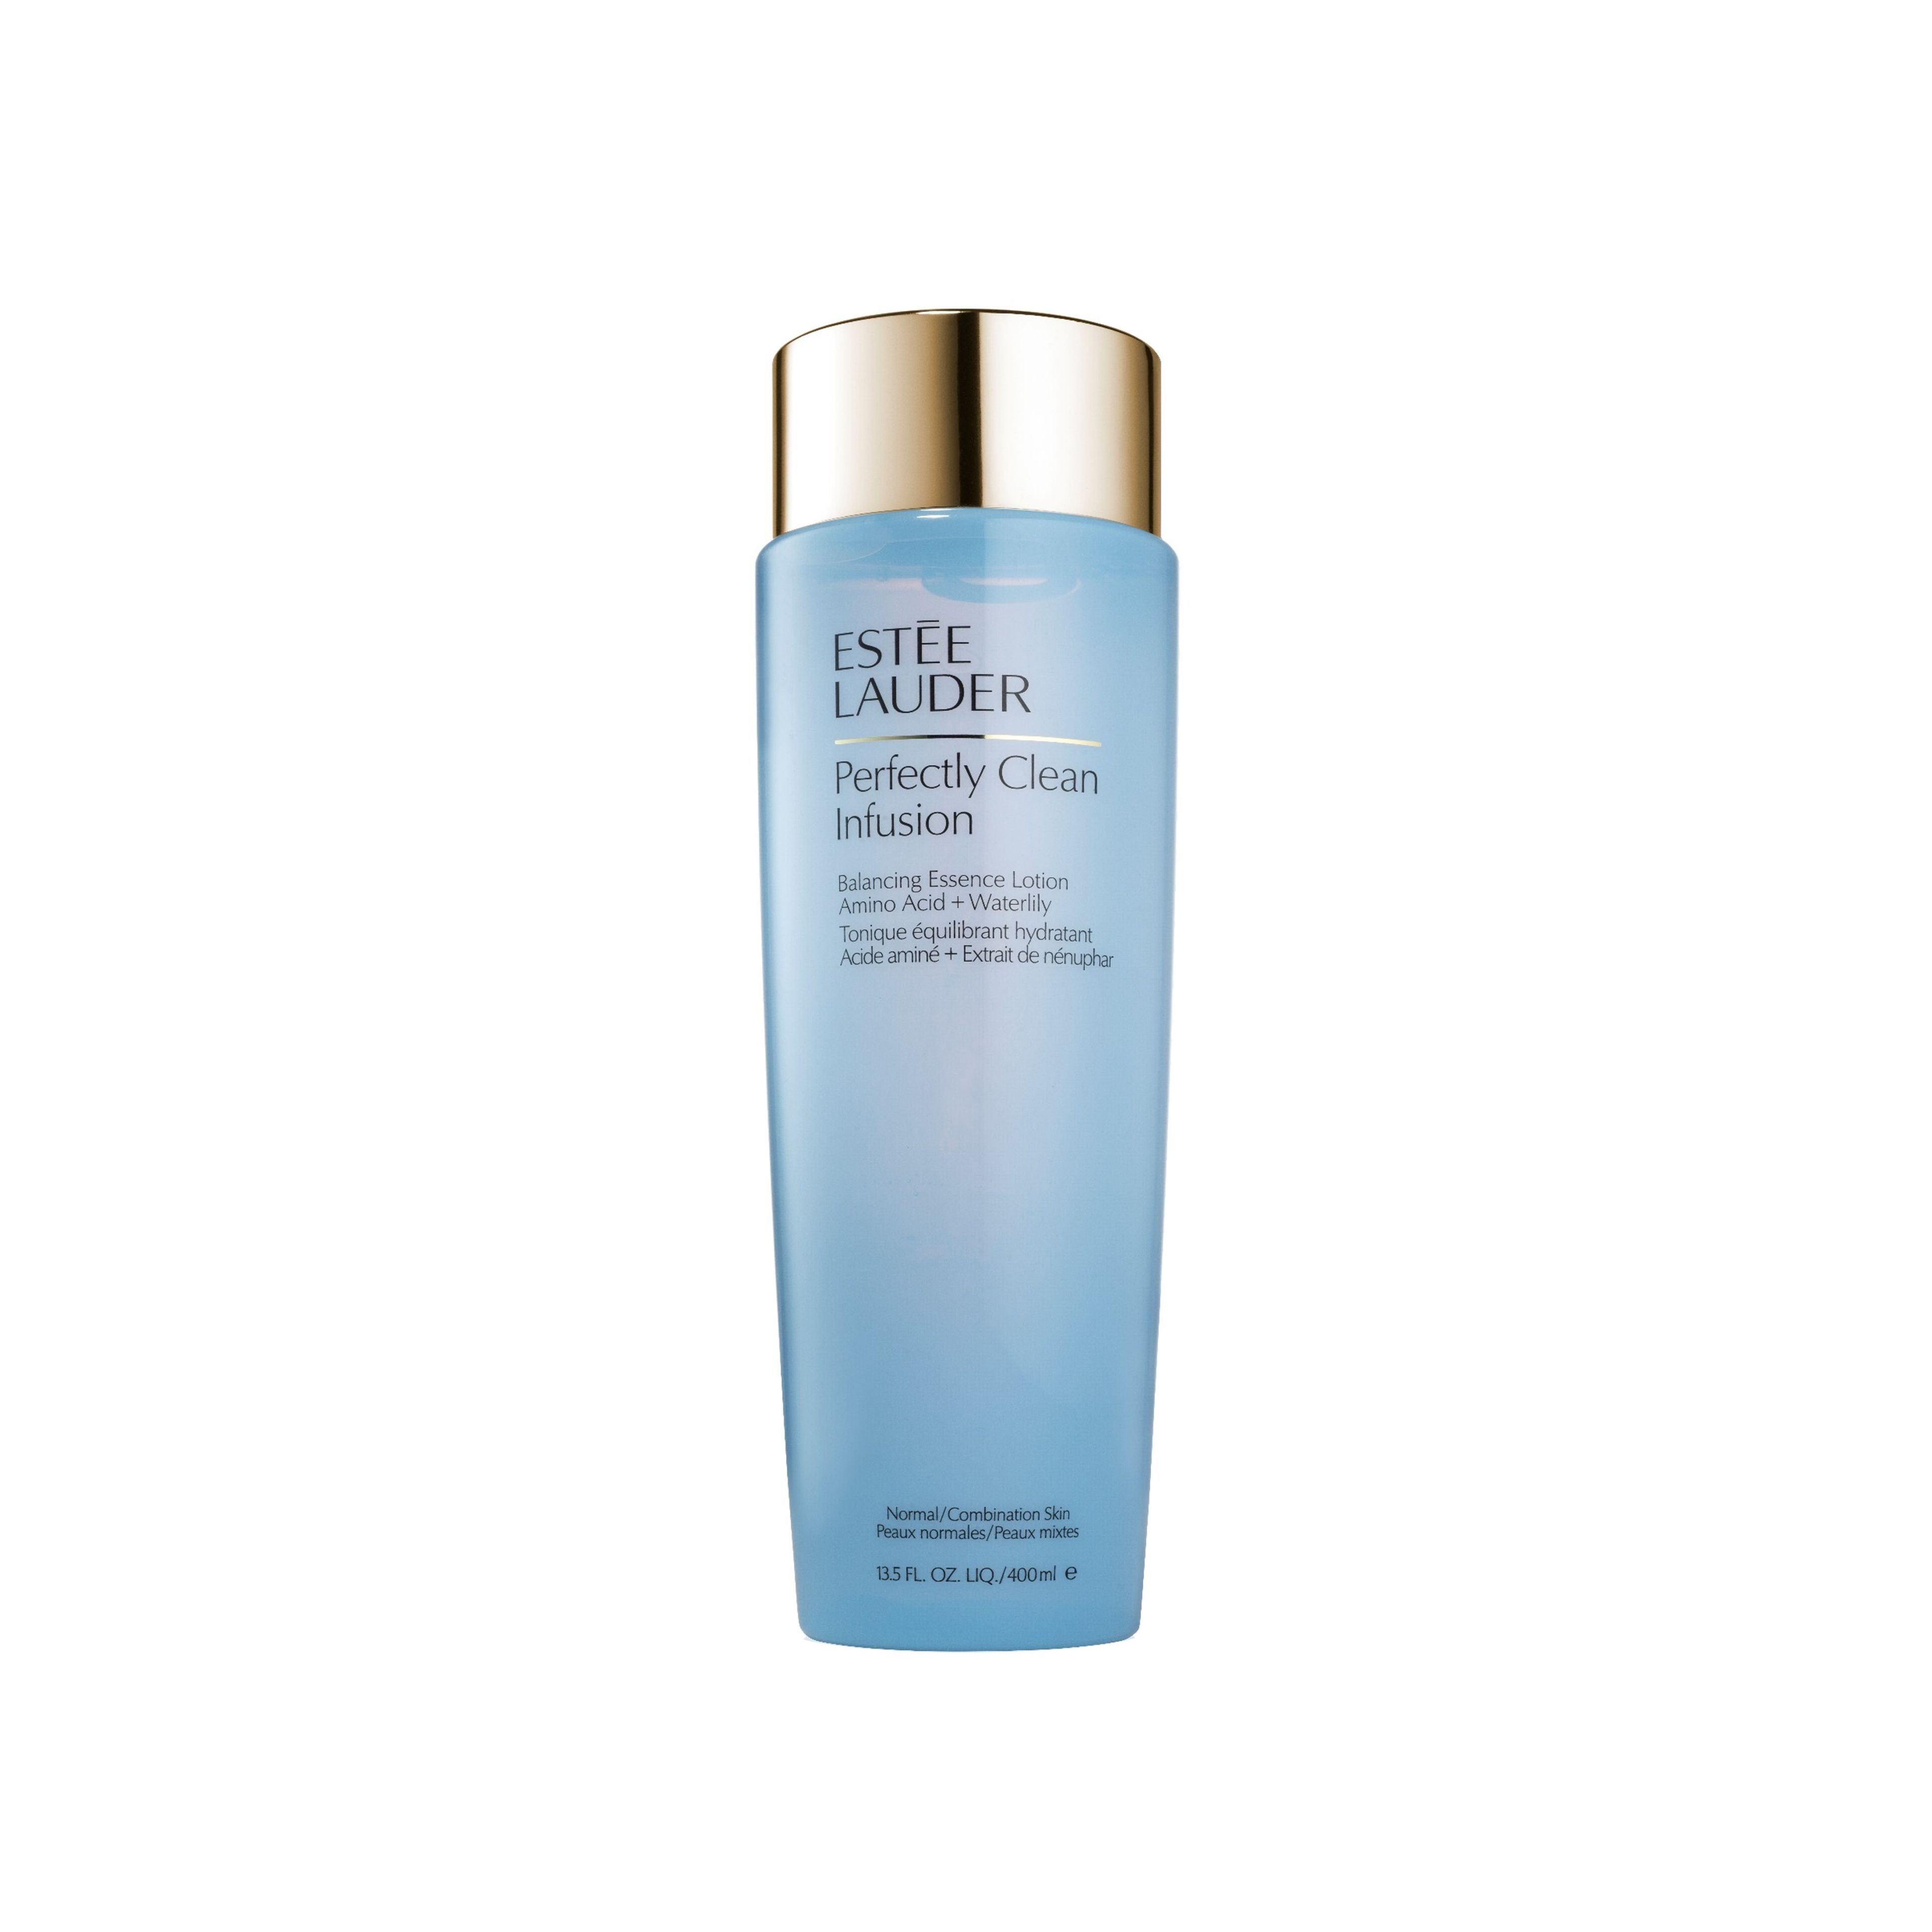 Estee Lauder Perfectly Clean Infusion 1